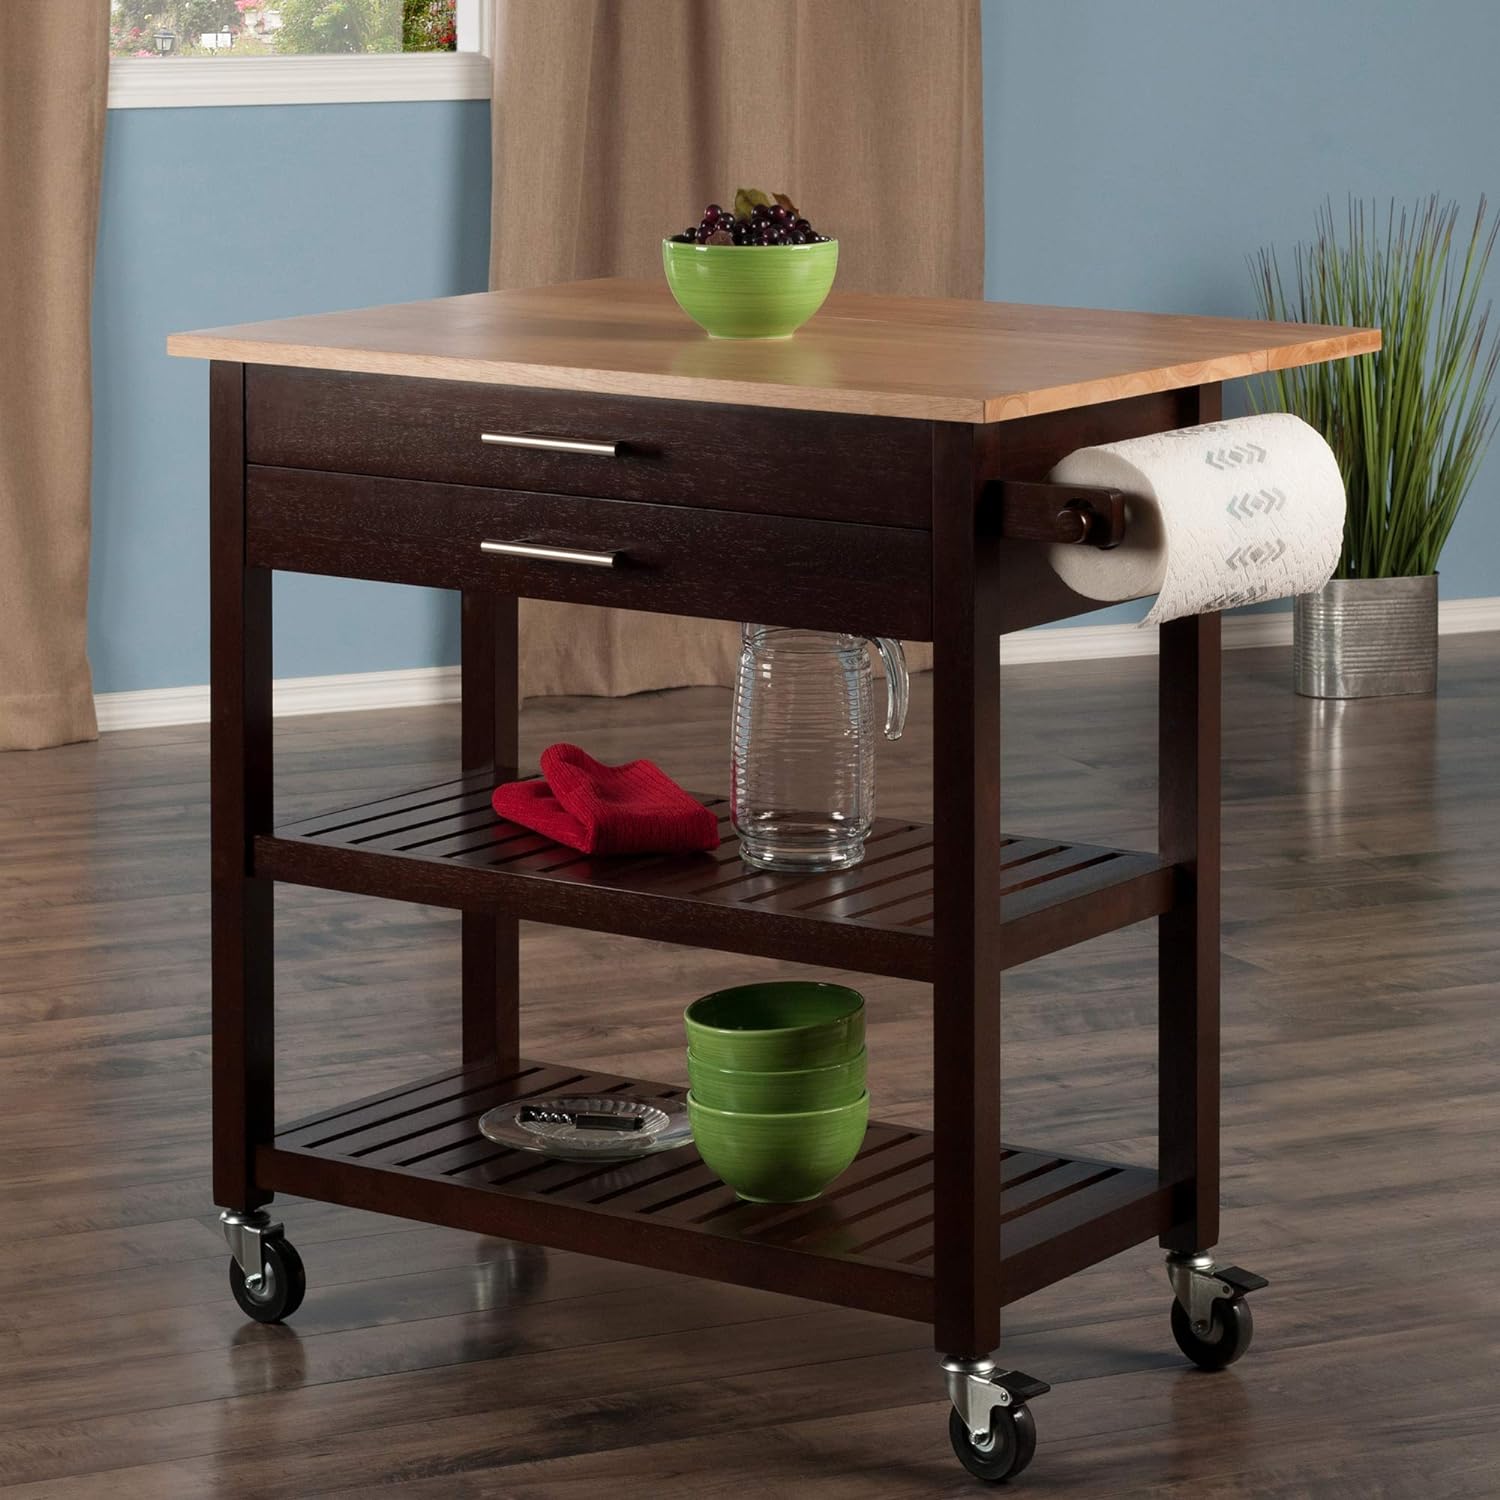 Winsome Langdon Cart Kitchen, Cappuccino/Natural, 36.57x26.42x34.45